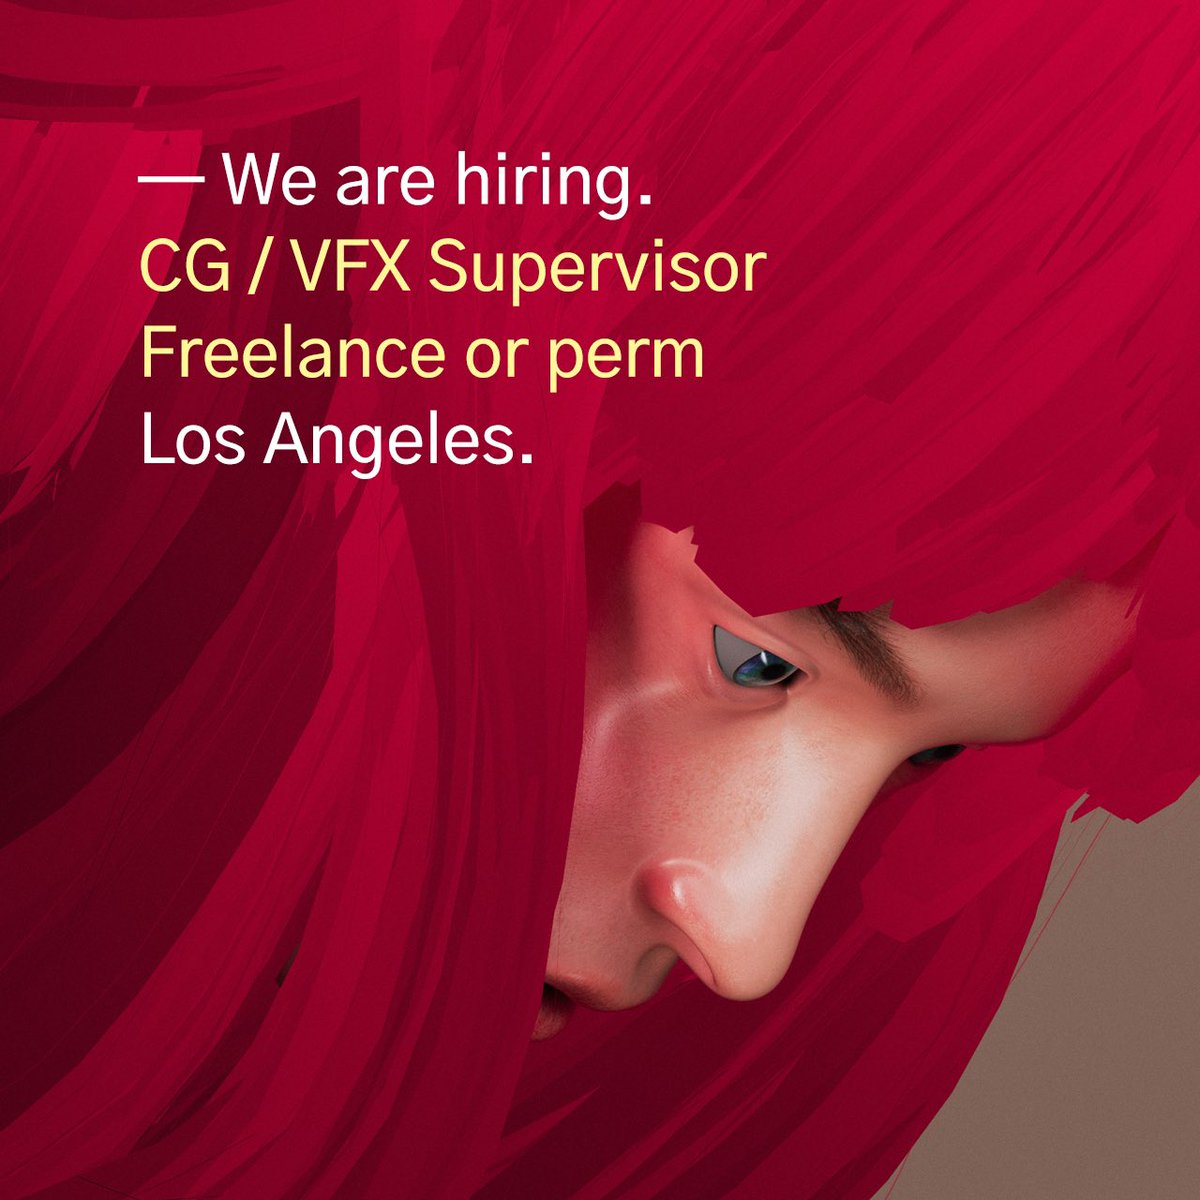 Our LA Studio is hiring ⚡️ We are currently looking for a talented CG / VFX Supervisor with a world class design led portfolio and at least 3-5 years experience. Sound like you? Please send portfolio & CV to talent.la@futuredeluxe.com